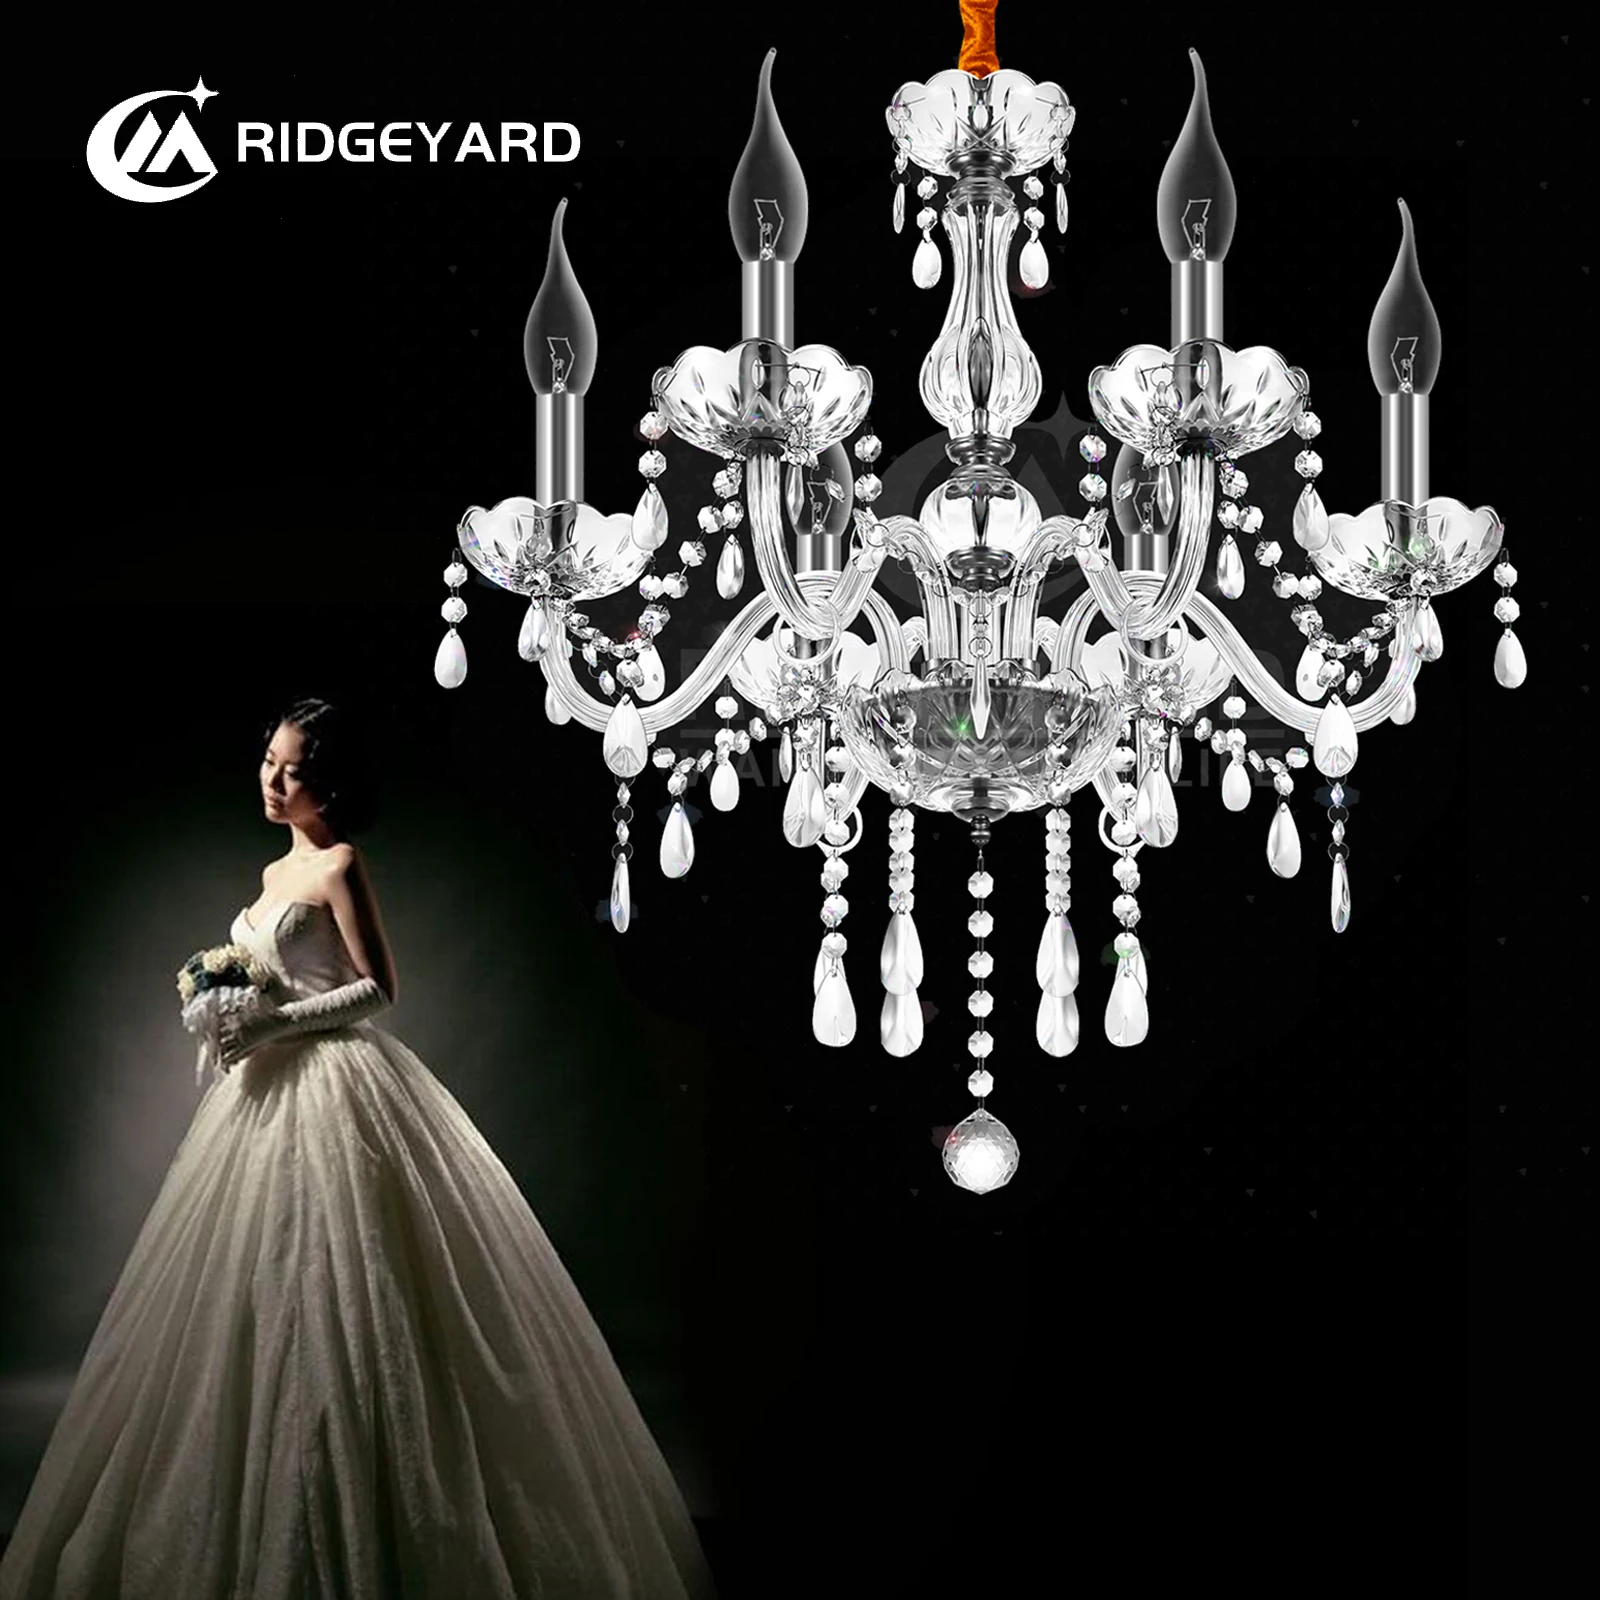 Ridgeyard Classic 6 Lights Tassels Chandelier 6 Arms Crystal Lustre Ceiling Lamp For Room Home Decoration Luxury Candle Lighting